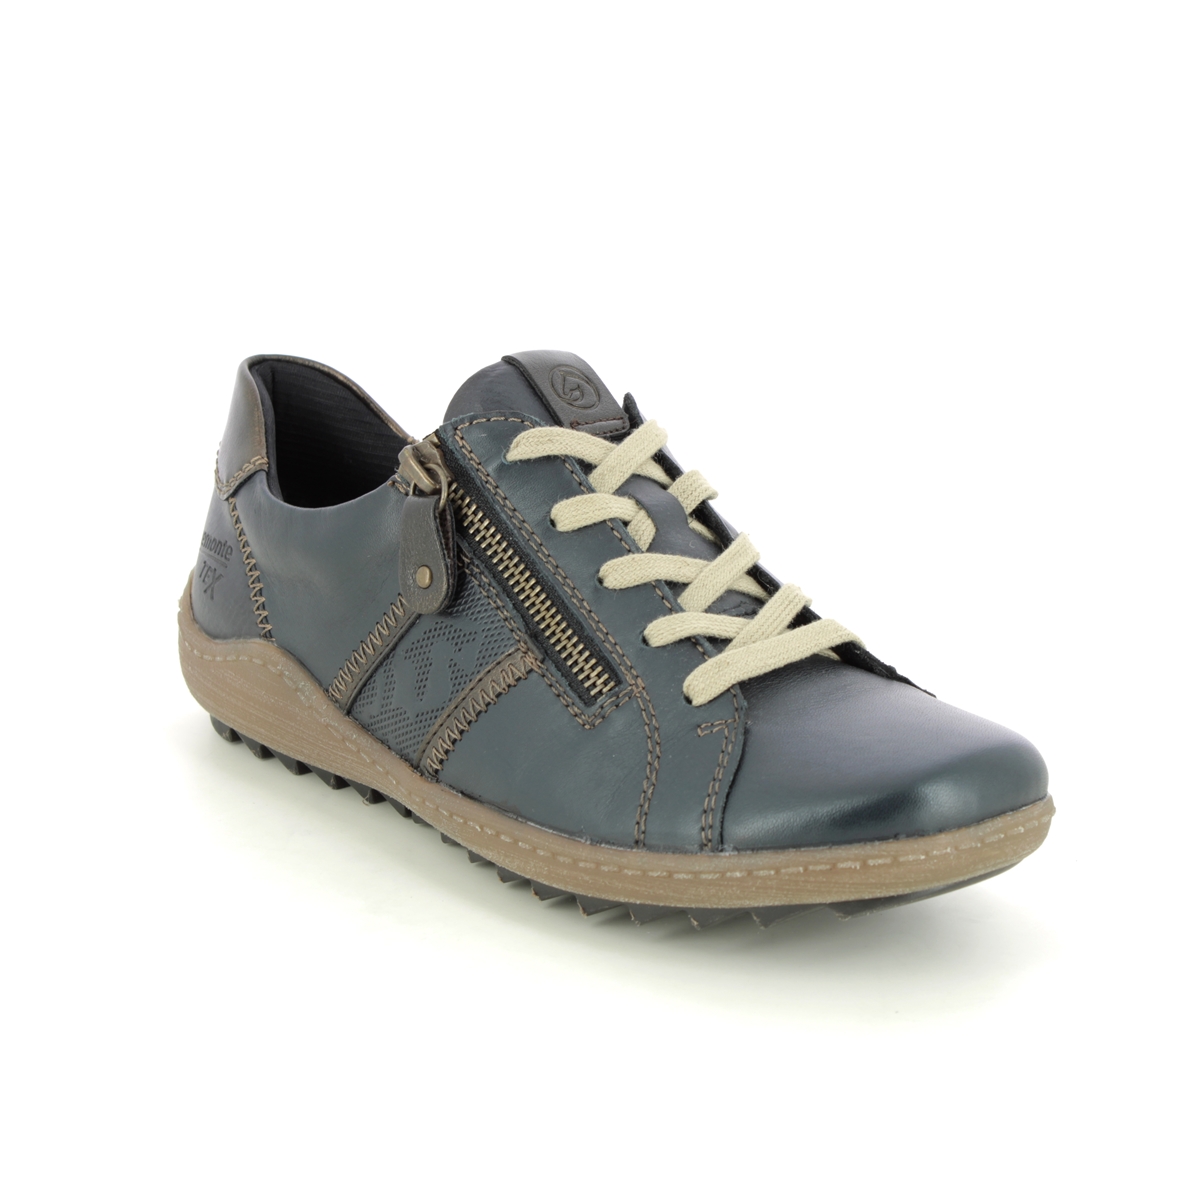 Remonte Zigspo Tex 15 Navy Leather Womens Lacing Shoes R1426-15 In Size 38 In Plain Navy Leather